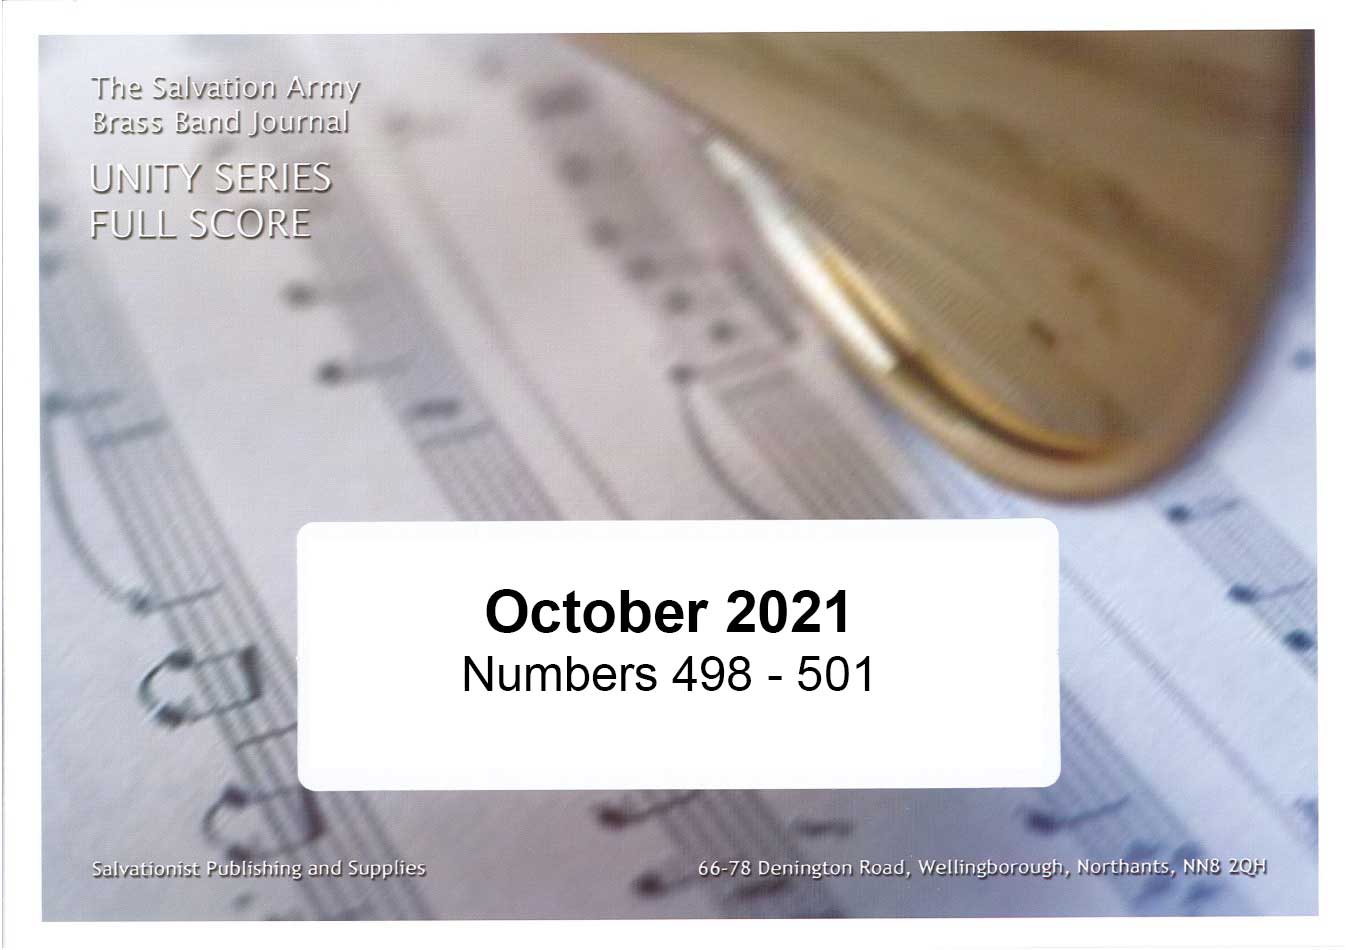 Unity Series Band Journal - Numbers 498 - 501, October 2021